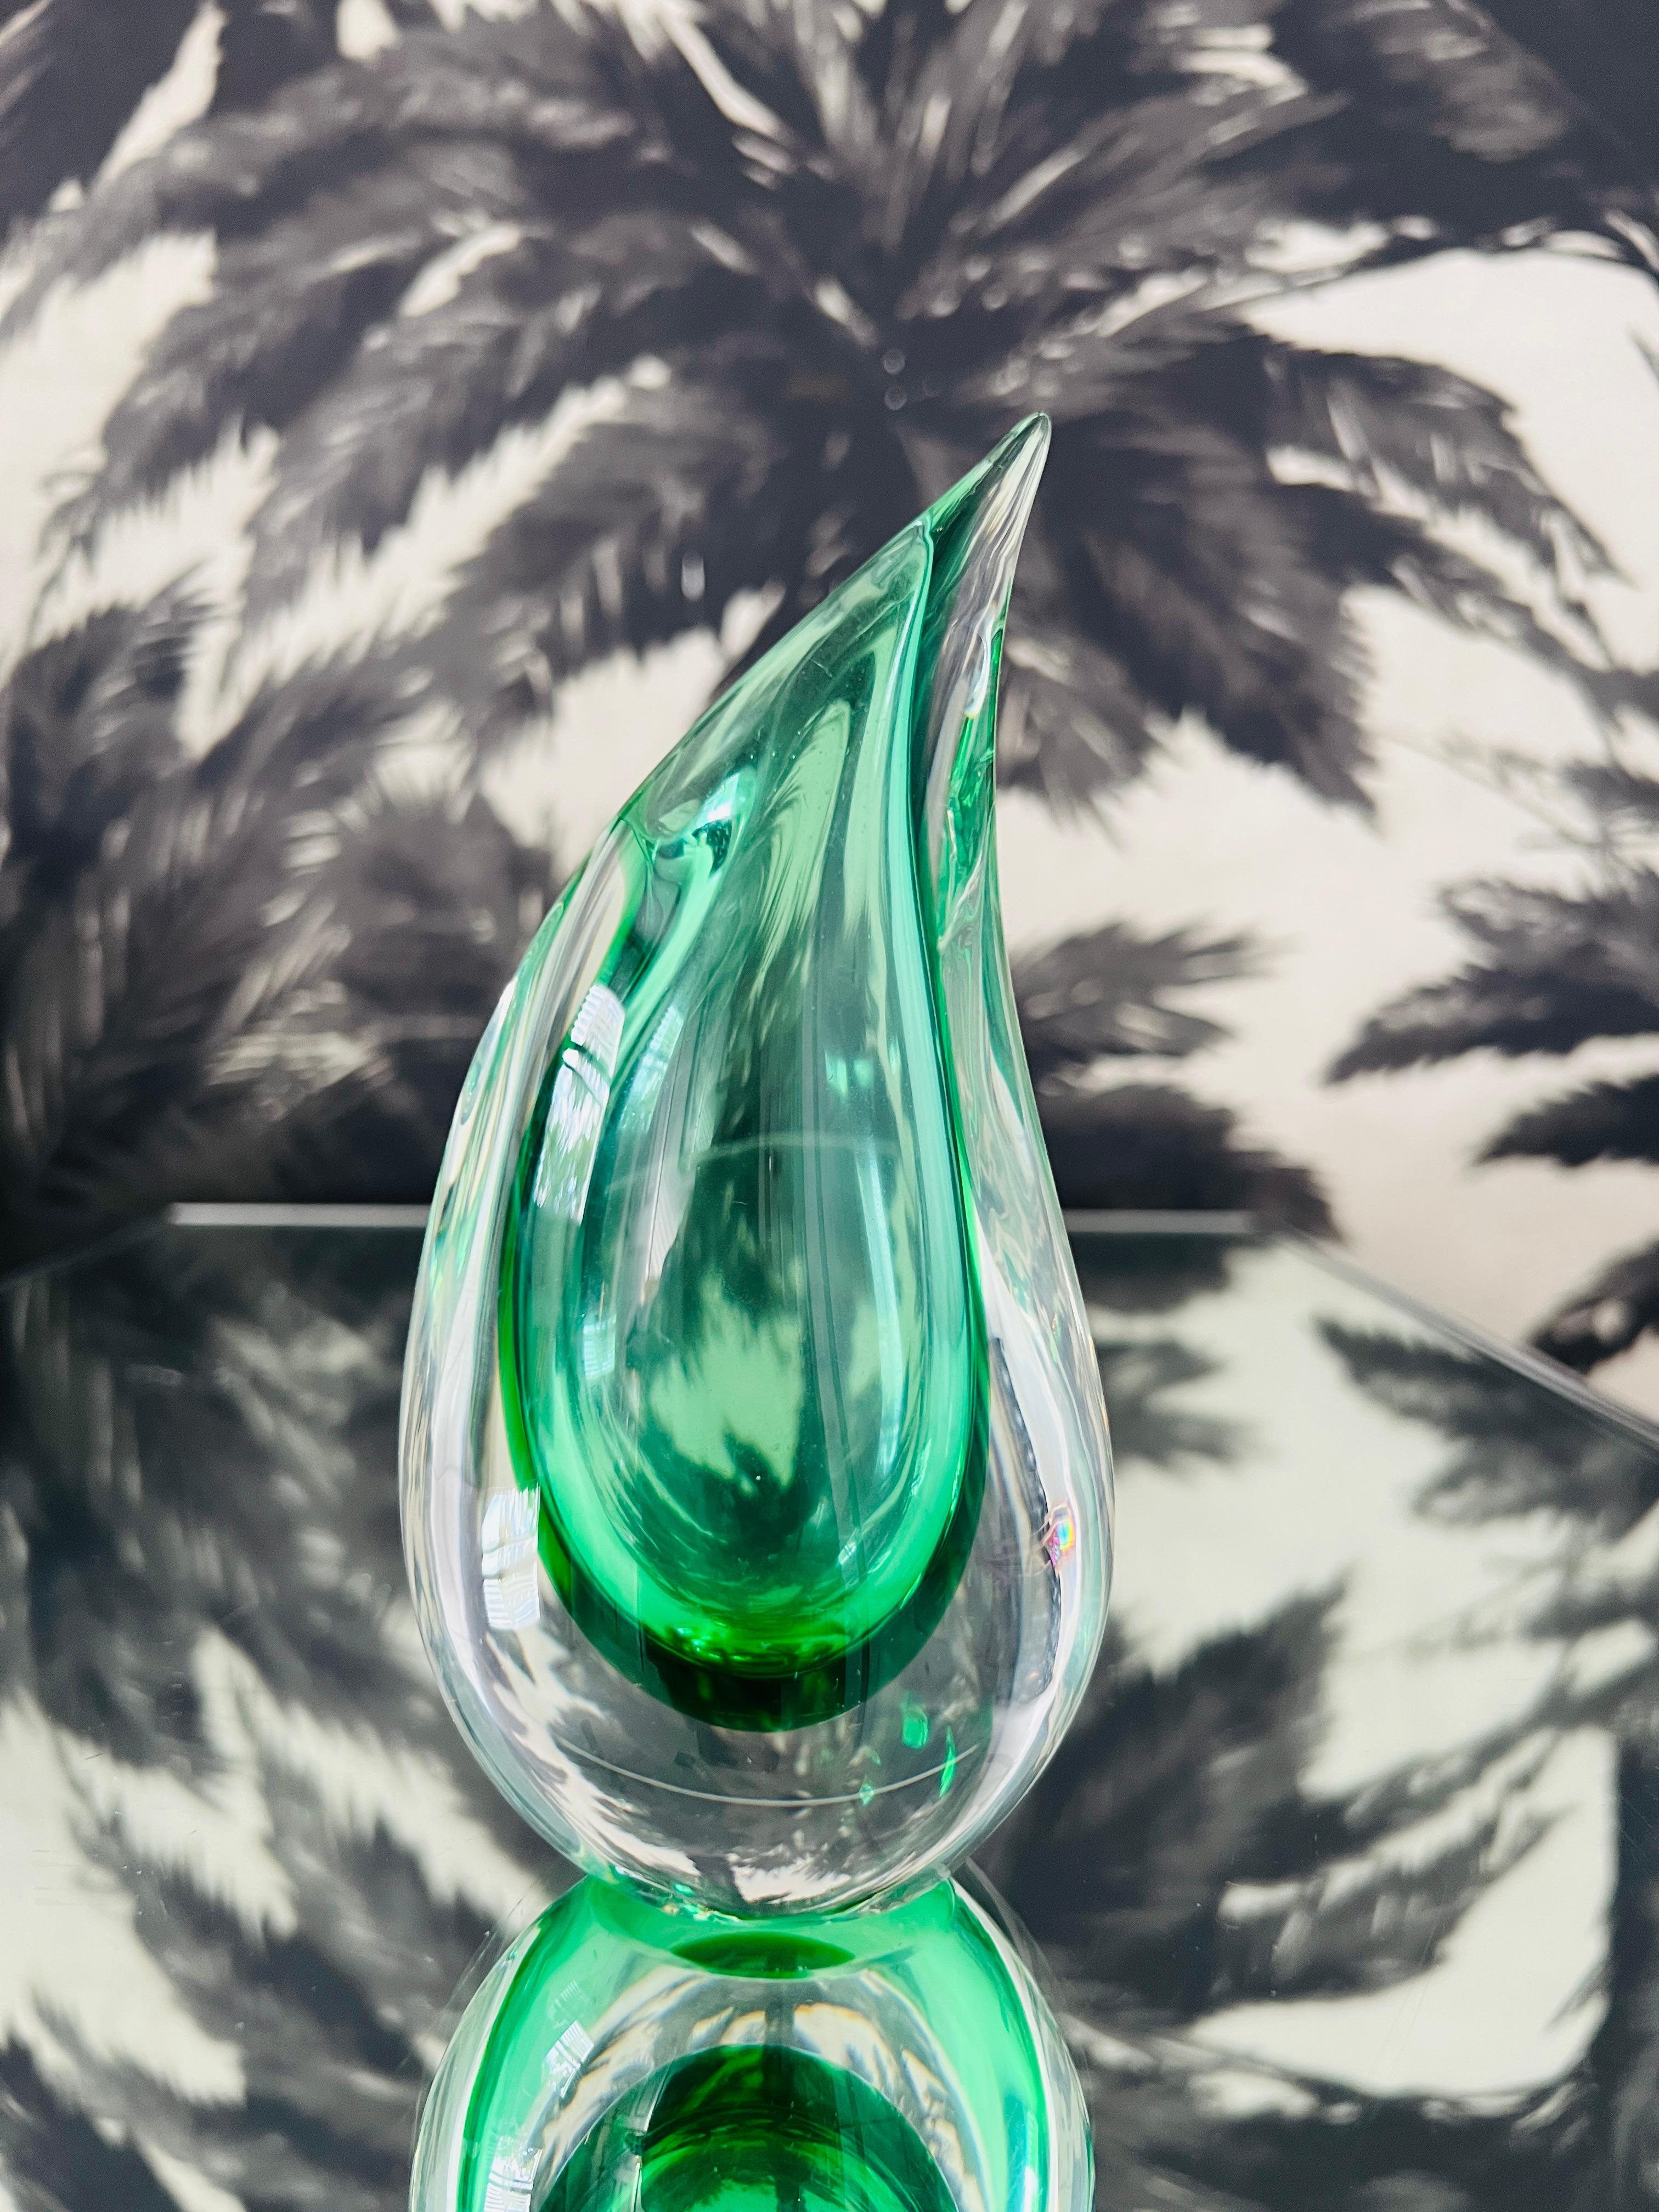 Mid-Century Modern Green Murano Glass Bud Vase with Flame Tip Design by Luigi Onesto, 1970's Signed